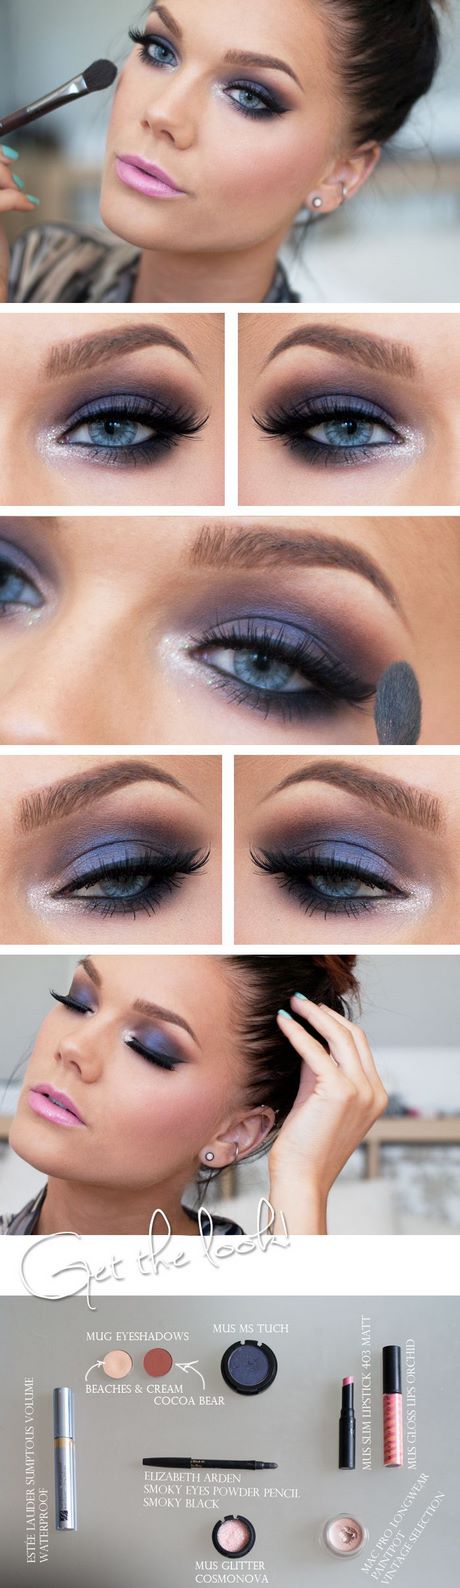 2023-new-years-eve-makeup-tutorial-48_13 2023 new years eve make-up tutorial